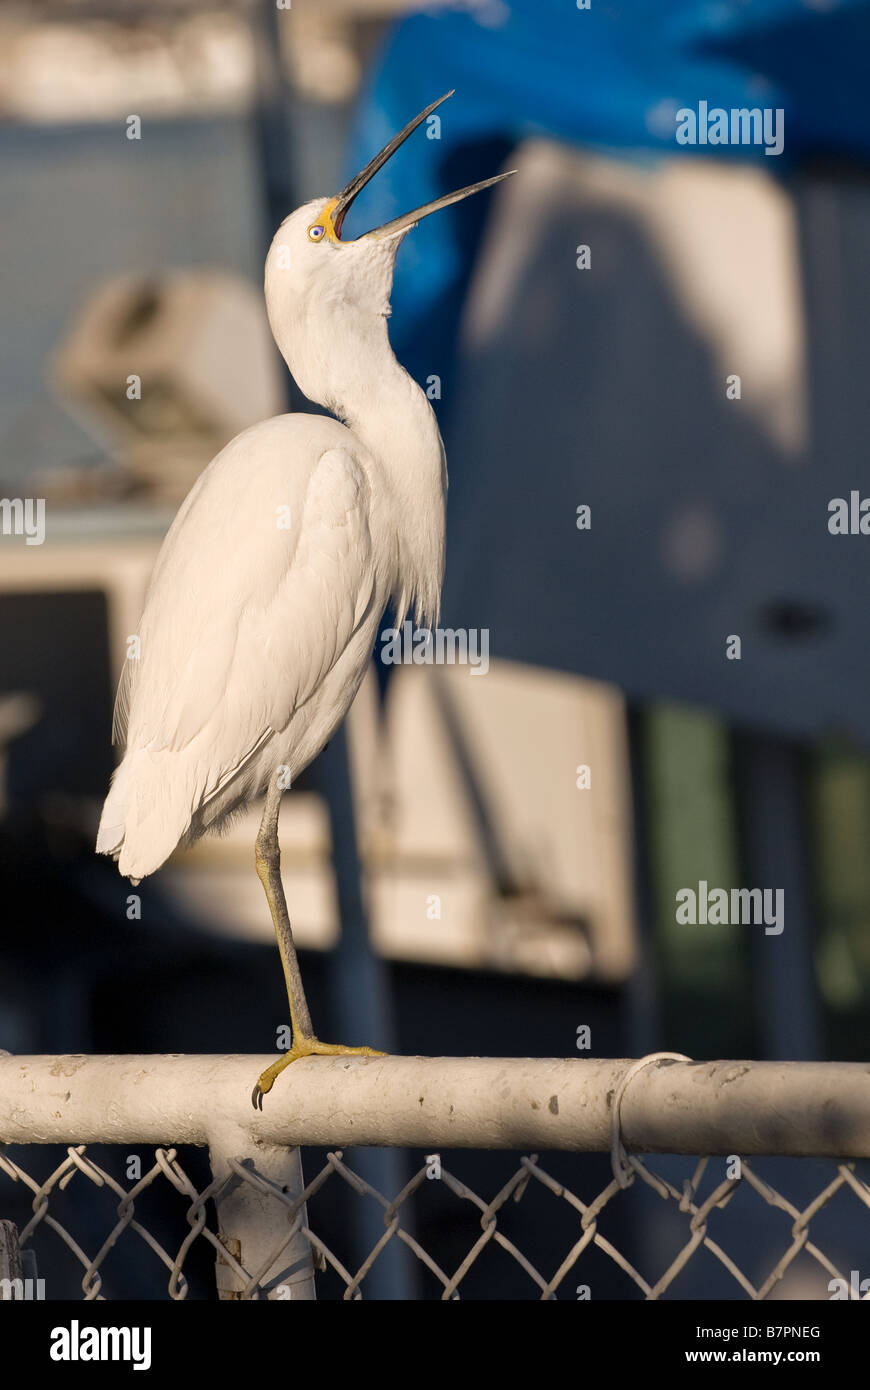 Snowy Egret squawking to protect territory.  Stock Photography by cahyman. Stock Photo